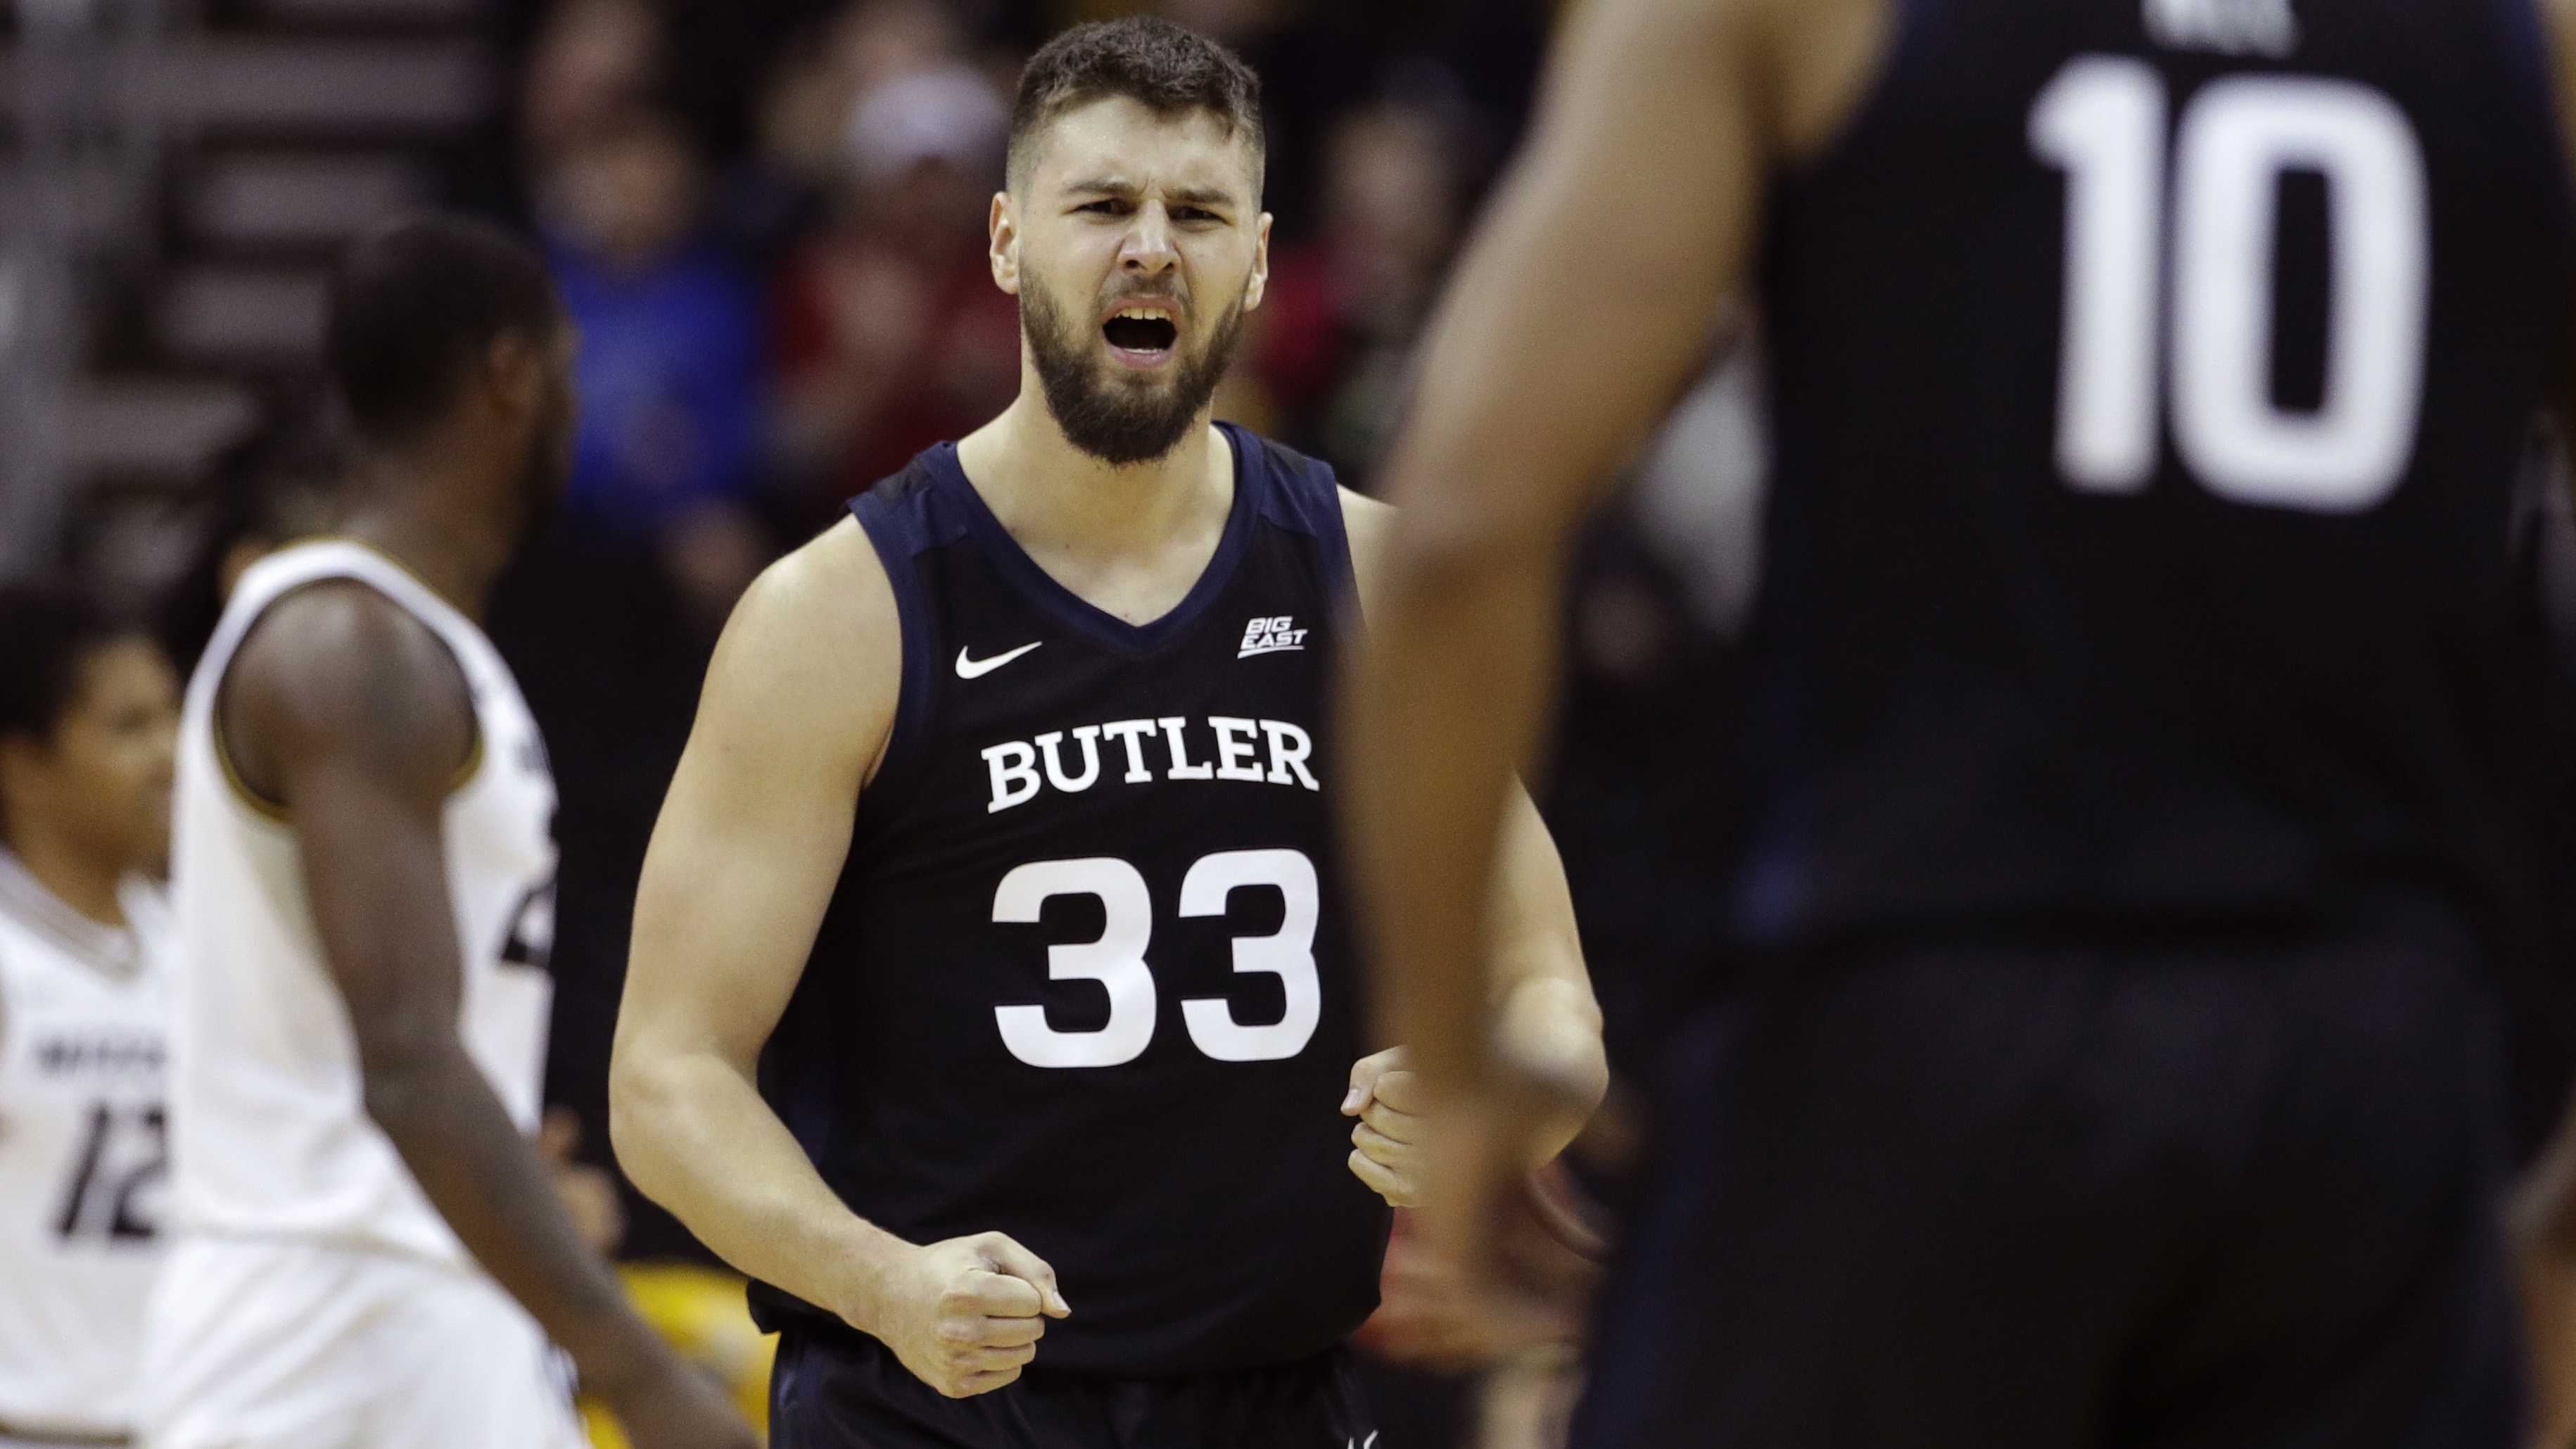 Butler improves to 6-0 with 63-52 win over Missouri